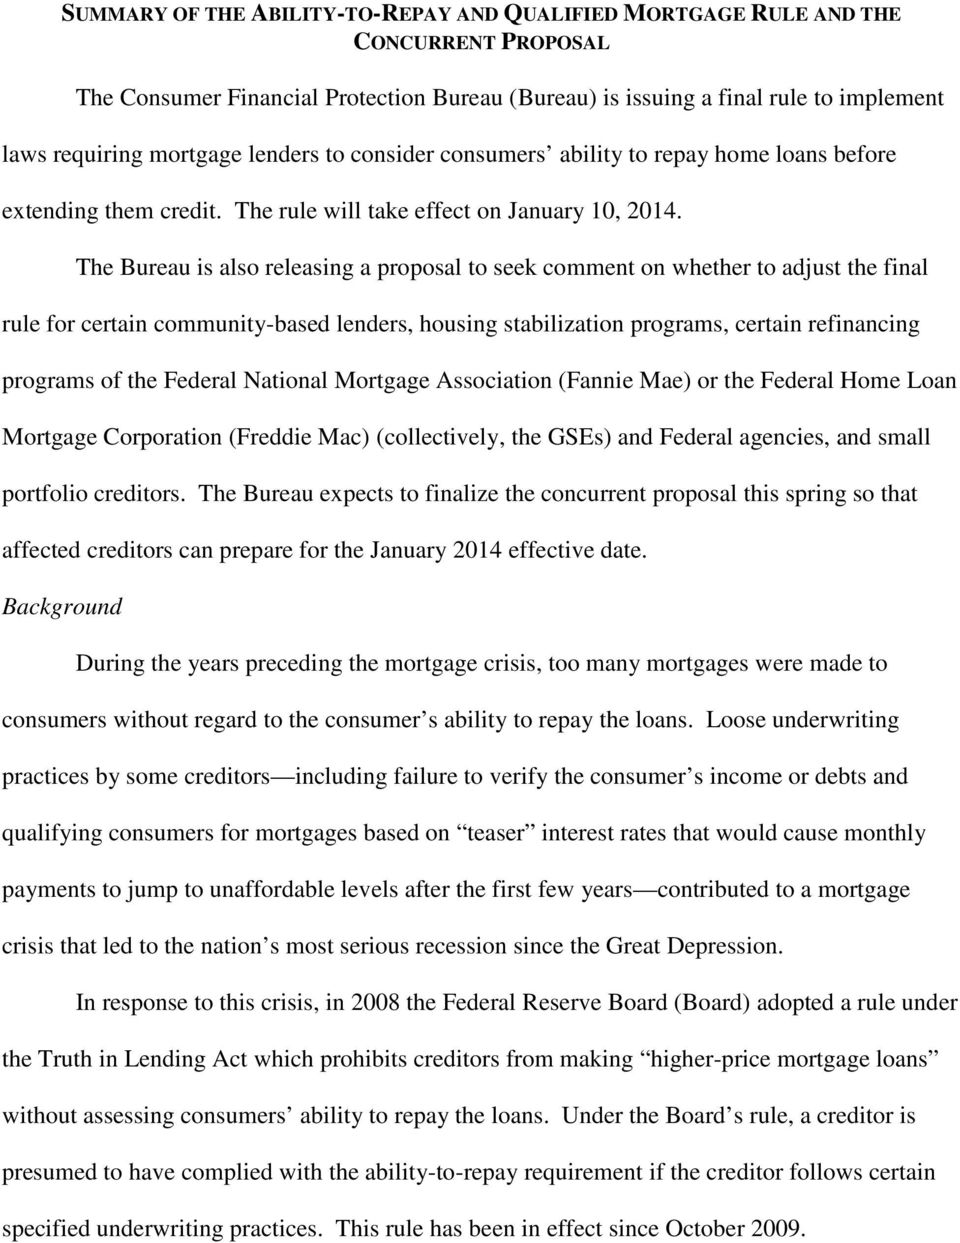 The Bureau is also releasing a proposal to seek comment on whether to adjust the final rule for certain community-based lenders, housing stabilization programs, certain refinancing programs of the